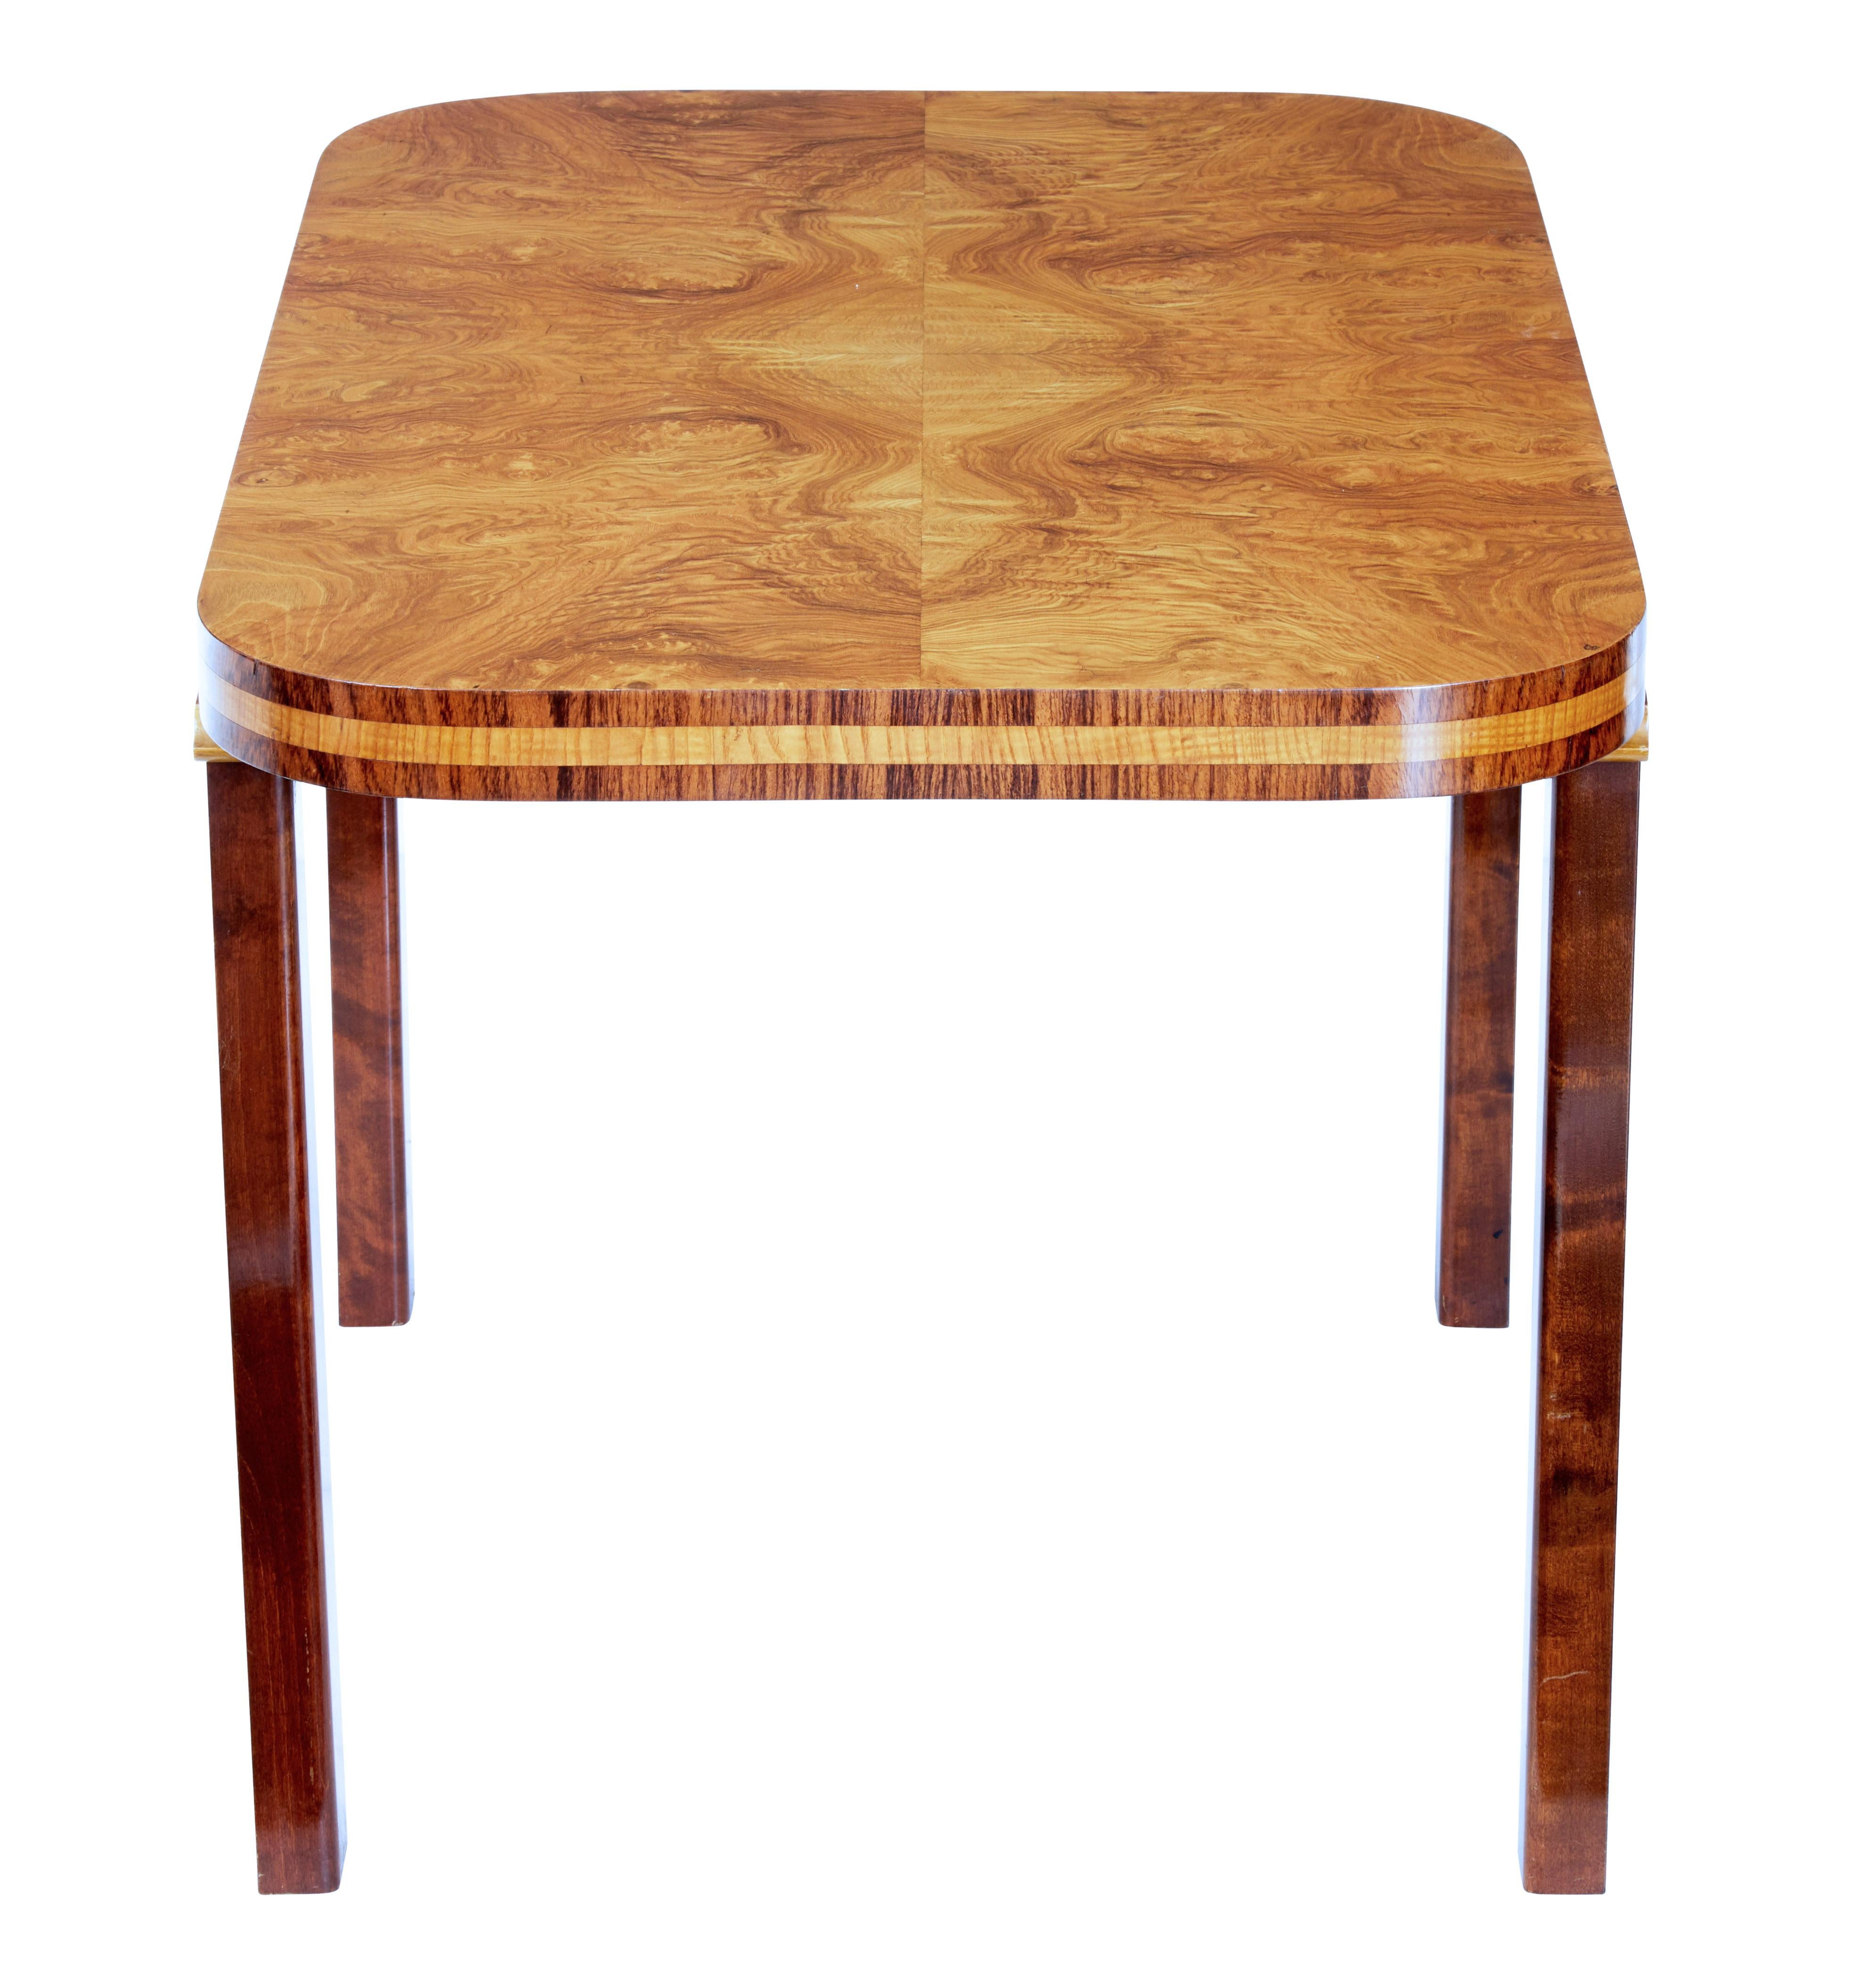 Mid-20th century Scandinavian elm root coffee table, circa 1950.

Beautiful quality Art Deco inspired coffee, made from fine quality elm root timber with quarter matched veneers to the top. Crossbanded with kingwood to the top edge and legs.